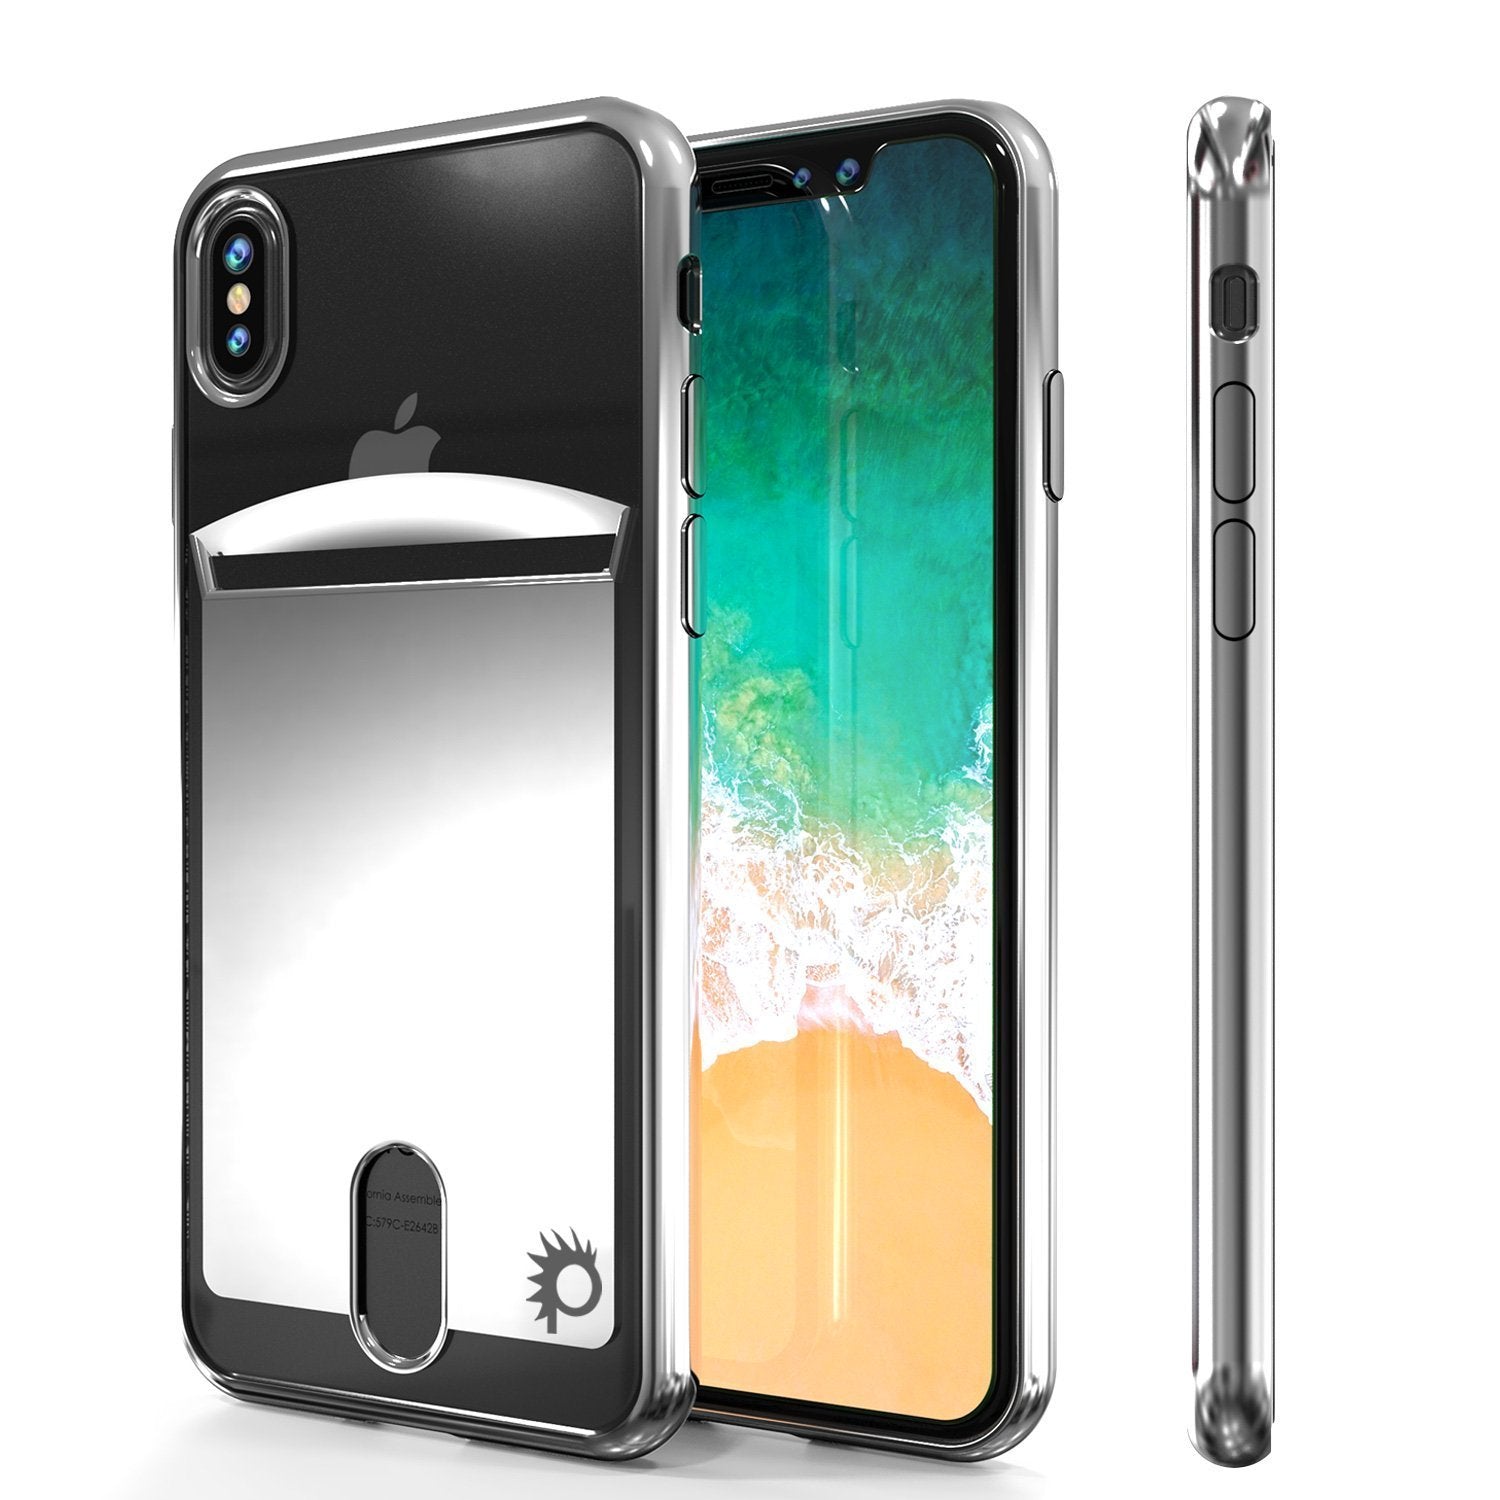 iPhone X Case, PUNKcase [LUCID Series] Slim Fit Protective Dual Layer Armor Cover [Silver] - PunkCase NZ